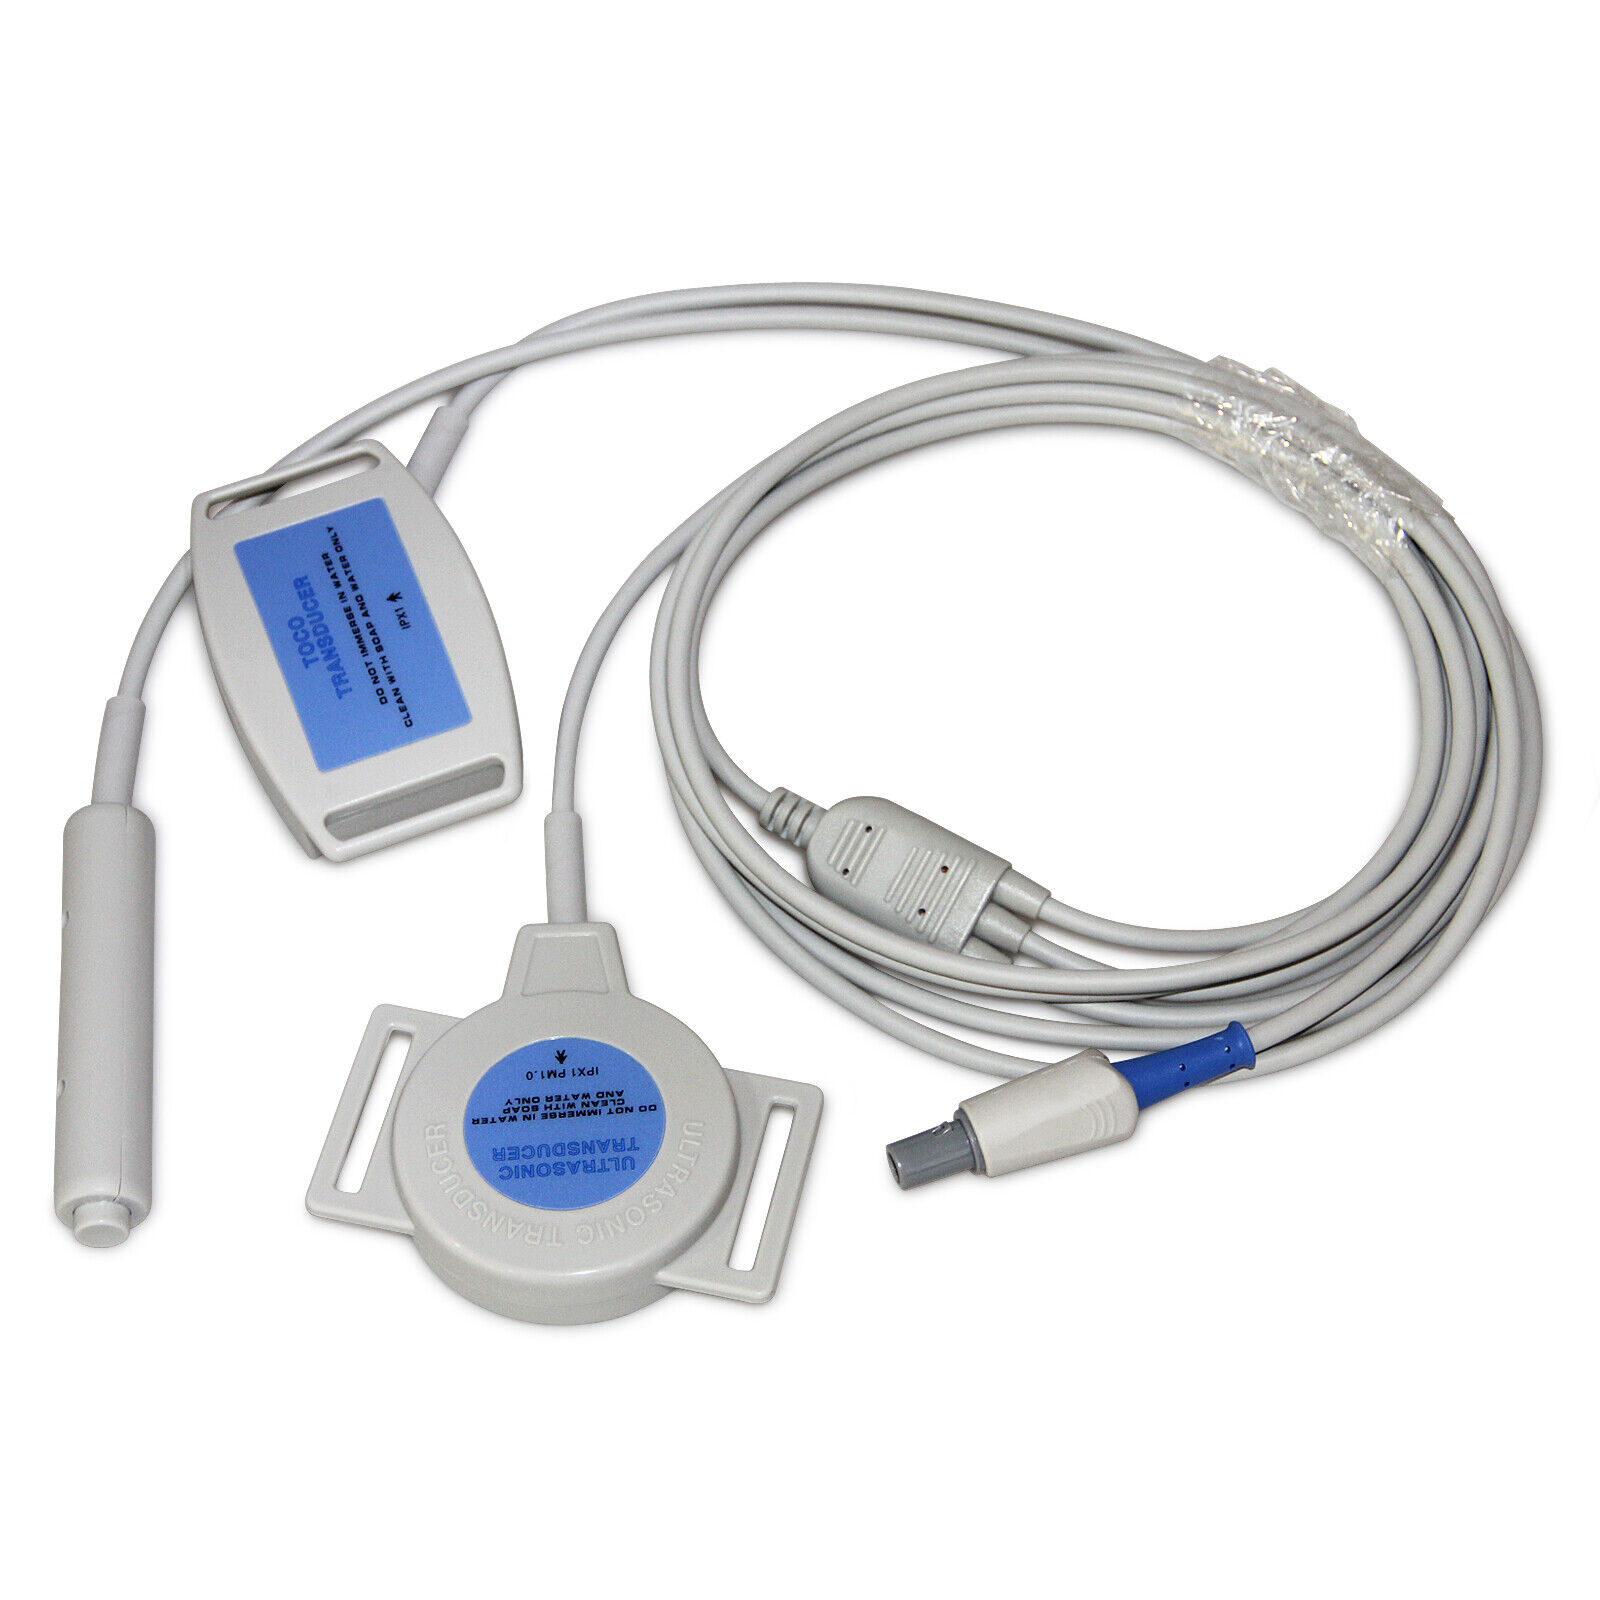 3 in 1 probe Ultrasound Transducer 1,TOCO Transducer,Remote Marke for CMS800G